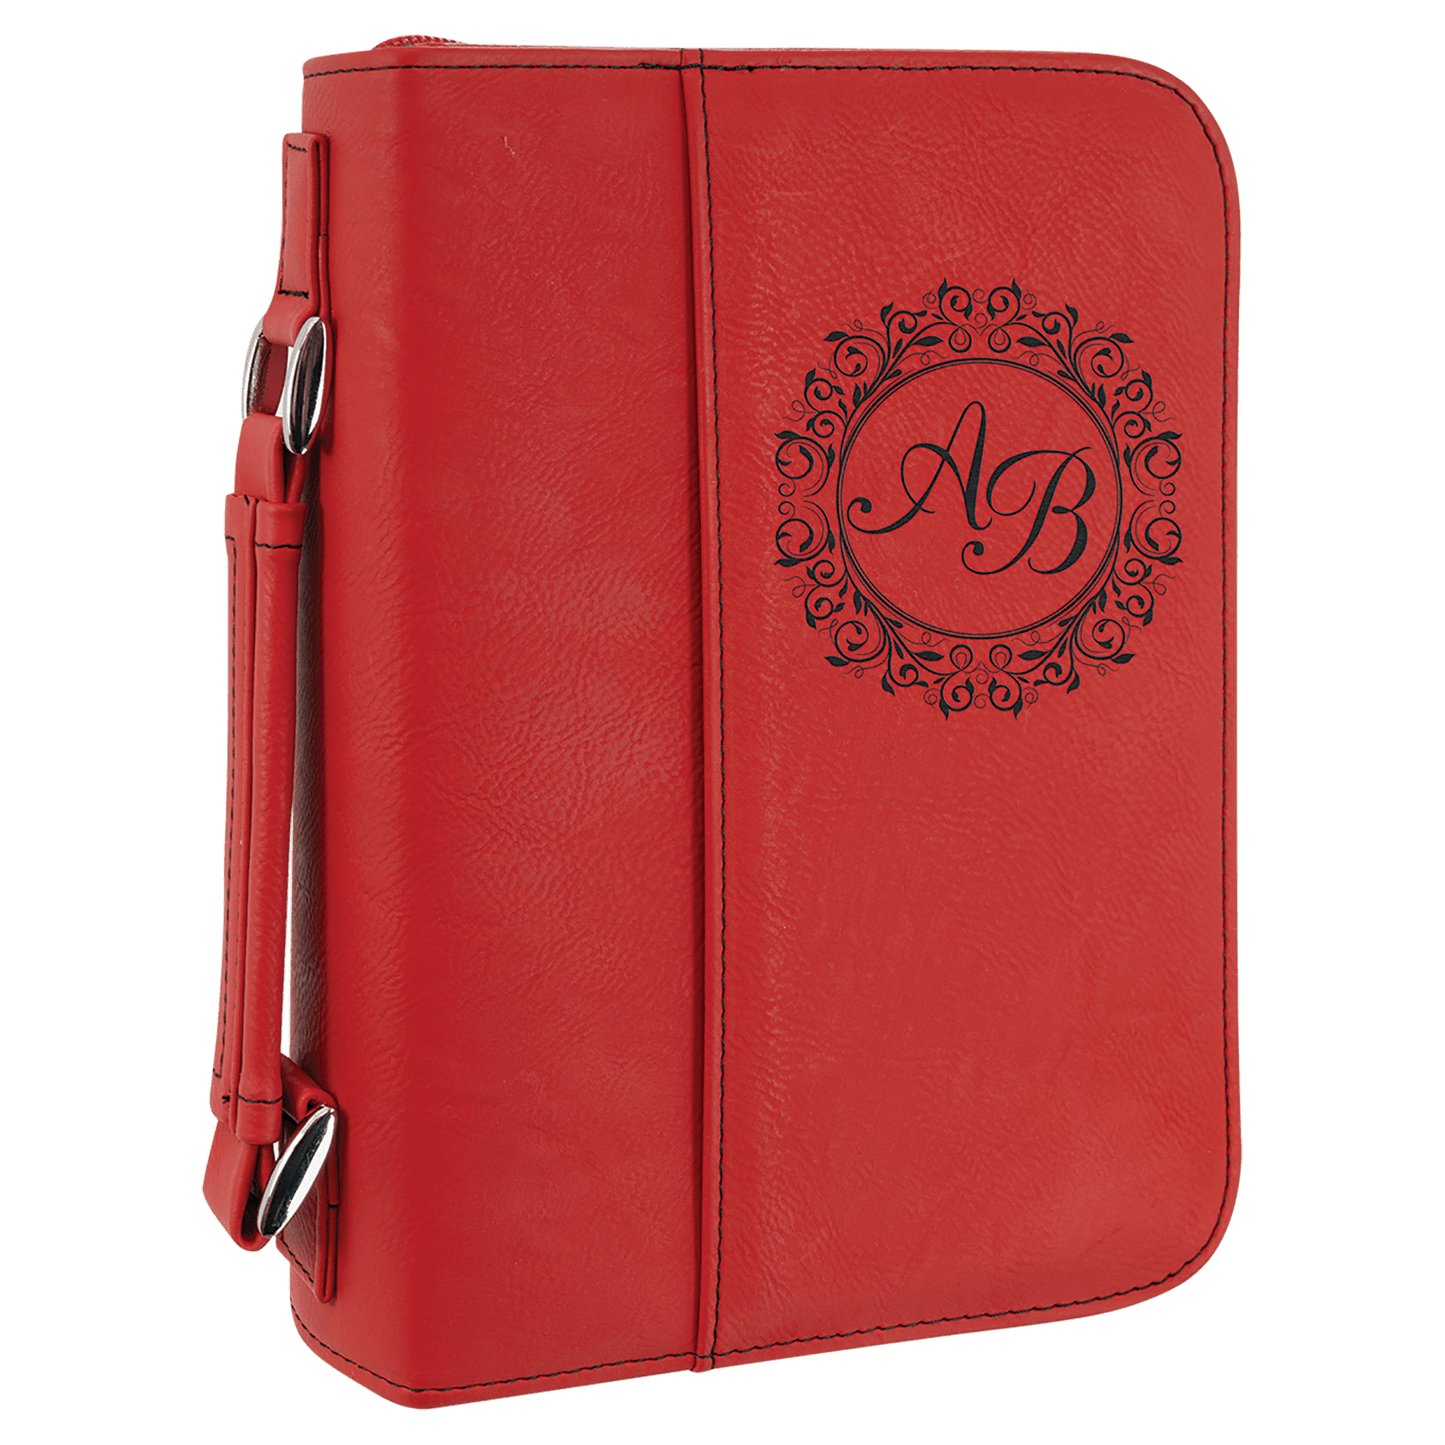 Leatherette Book/Bible Covers